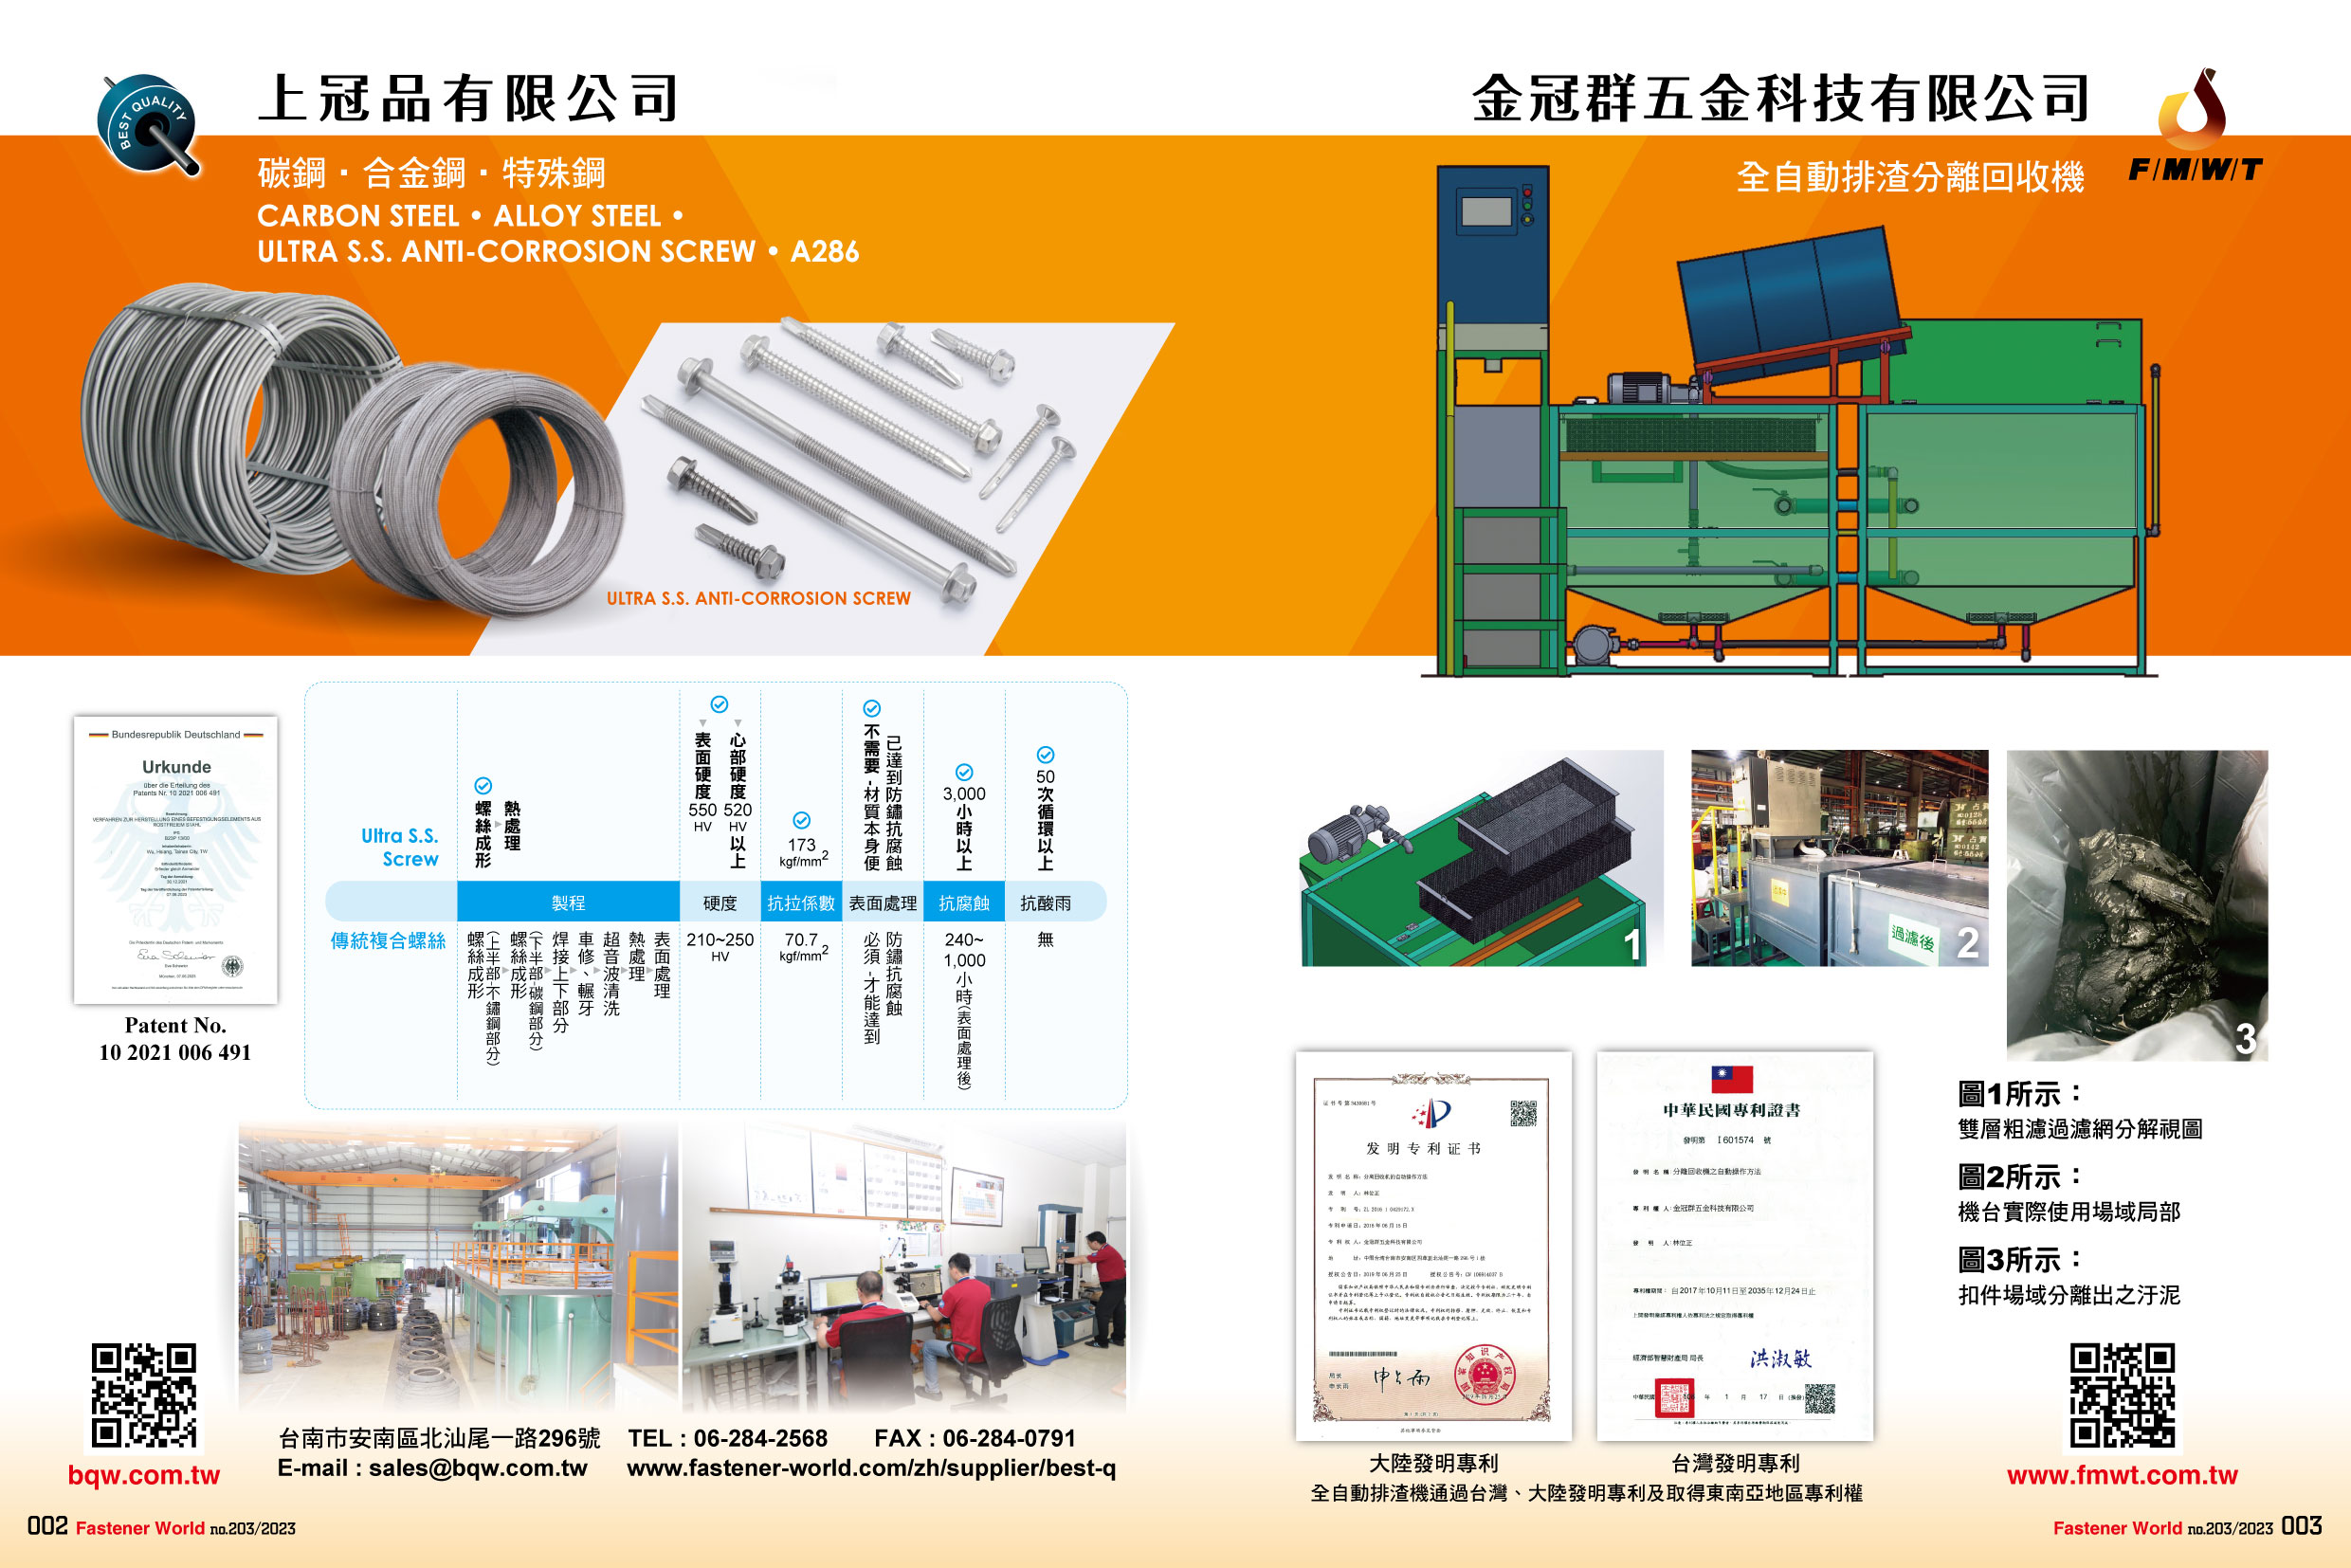 BEST QUALITY WIRE CO., LTD.  , Carbon Steel, ULTRA S.S. ANTI-CORROSION SCREW, A286